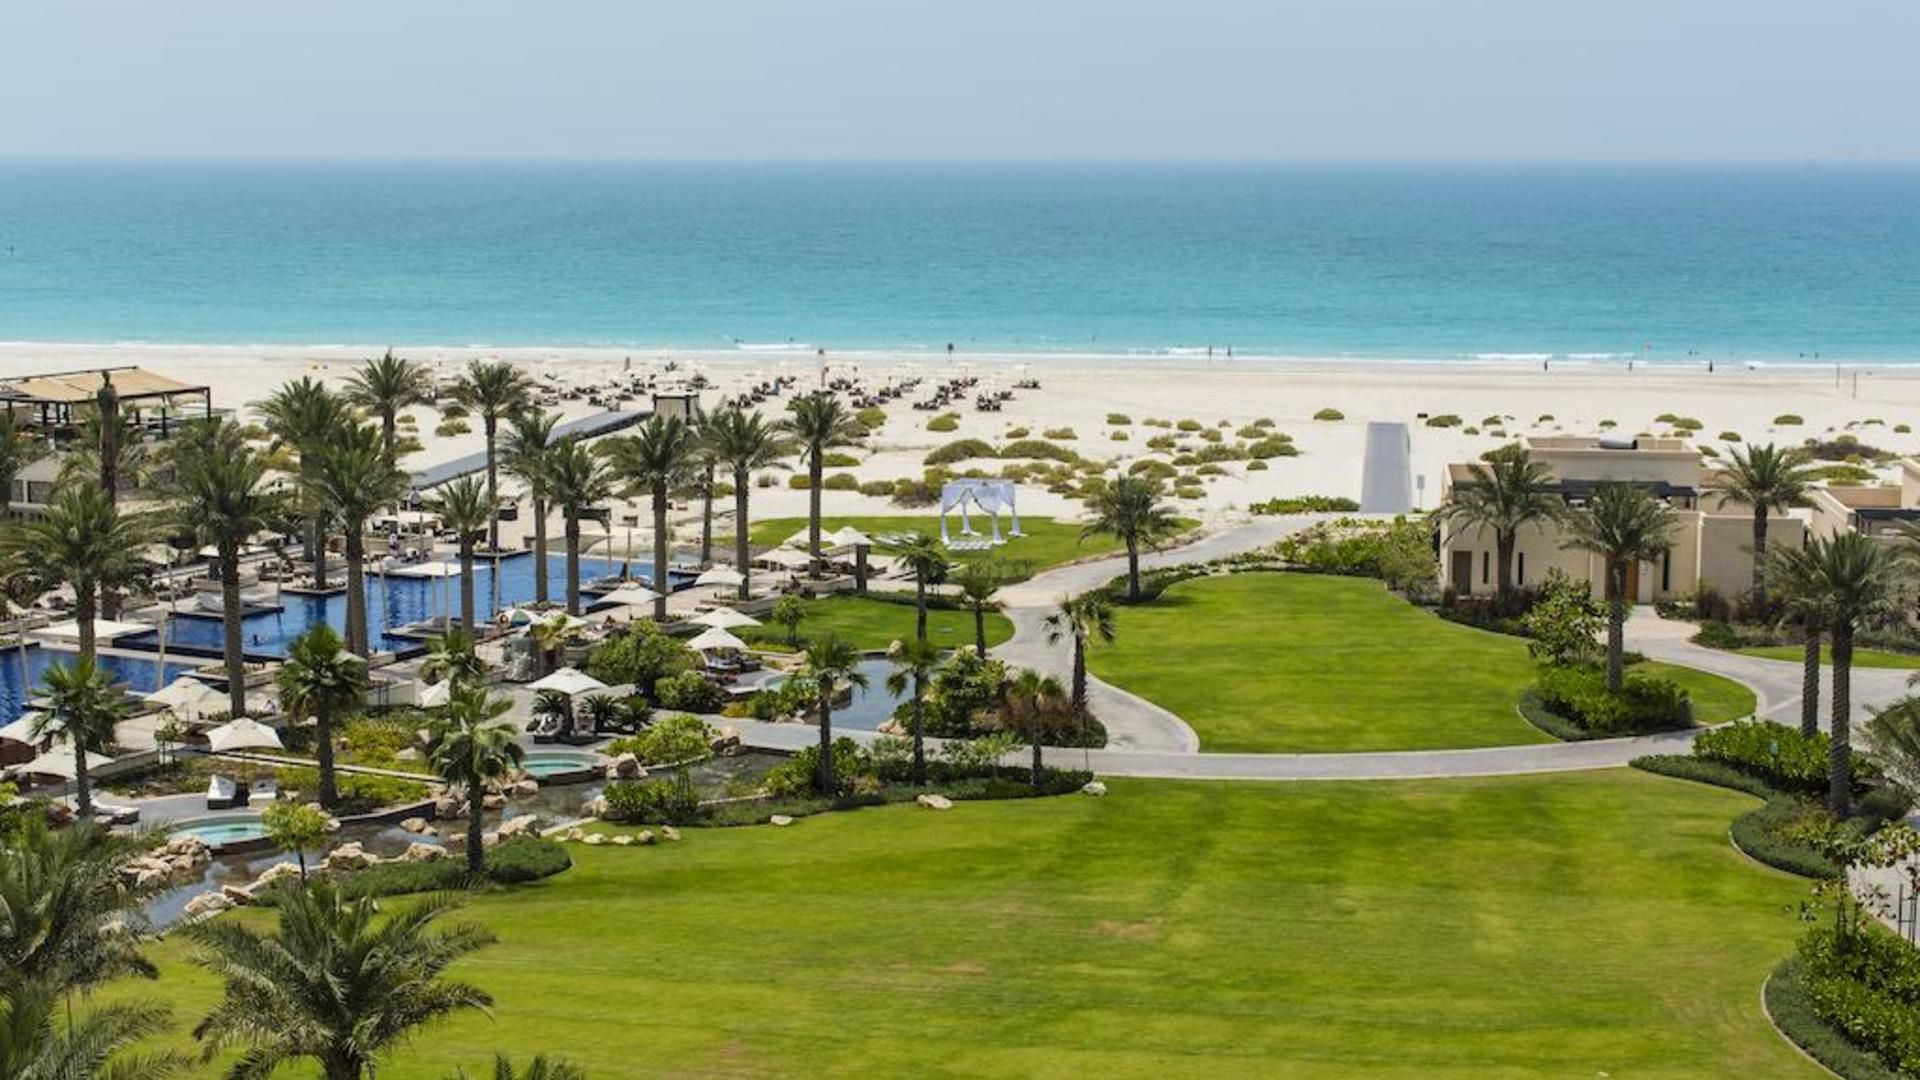 The 8 Best Gated Communities in Abu Dhabi